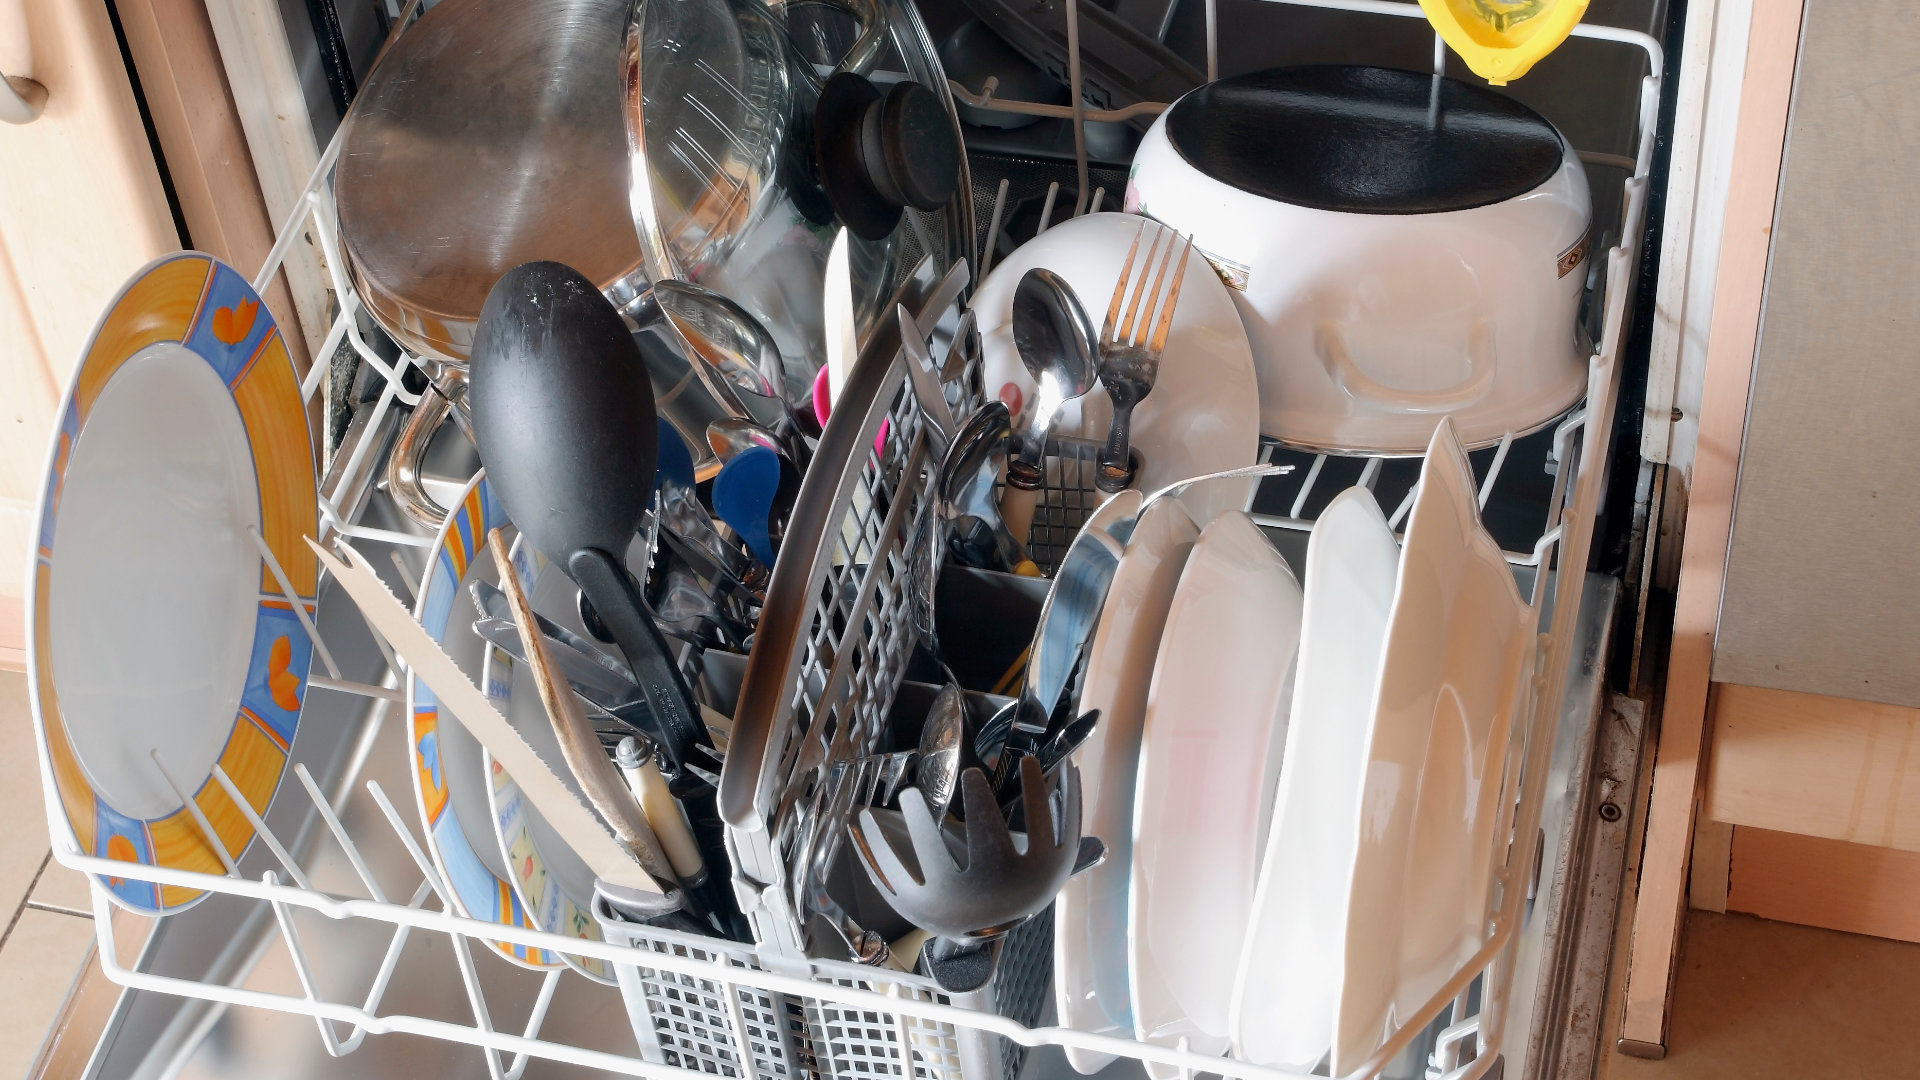 Featured image for “Amana Dishwasher Not Draining? Here’s What to Do”